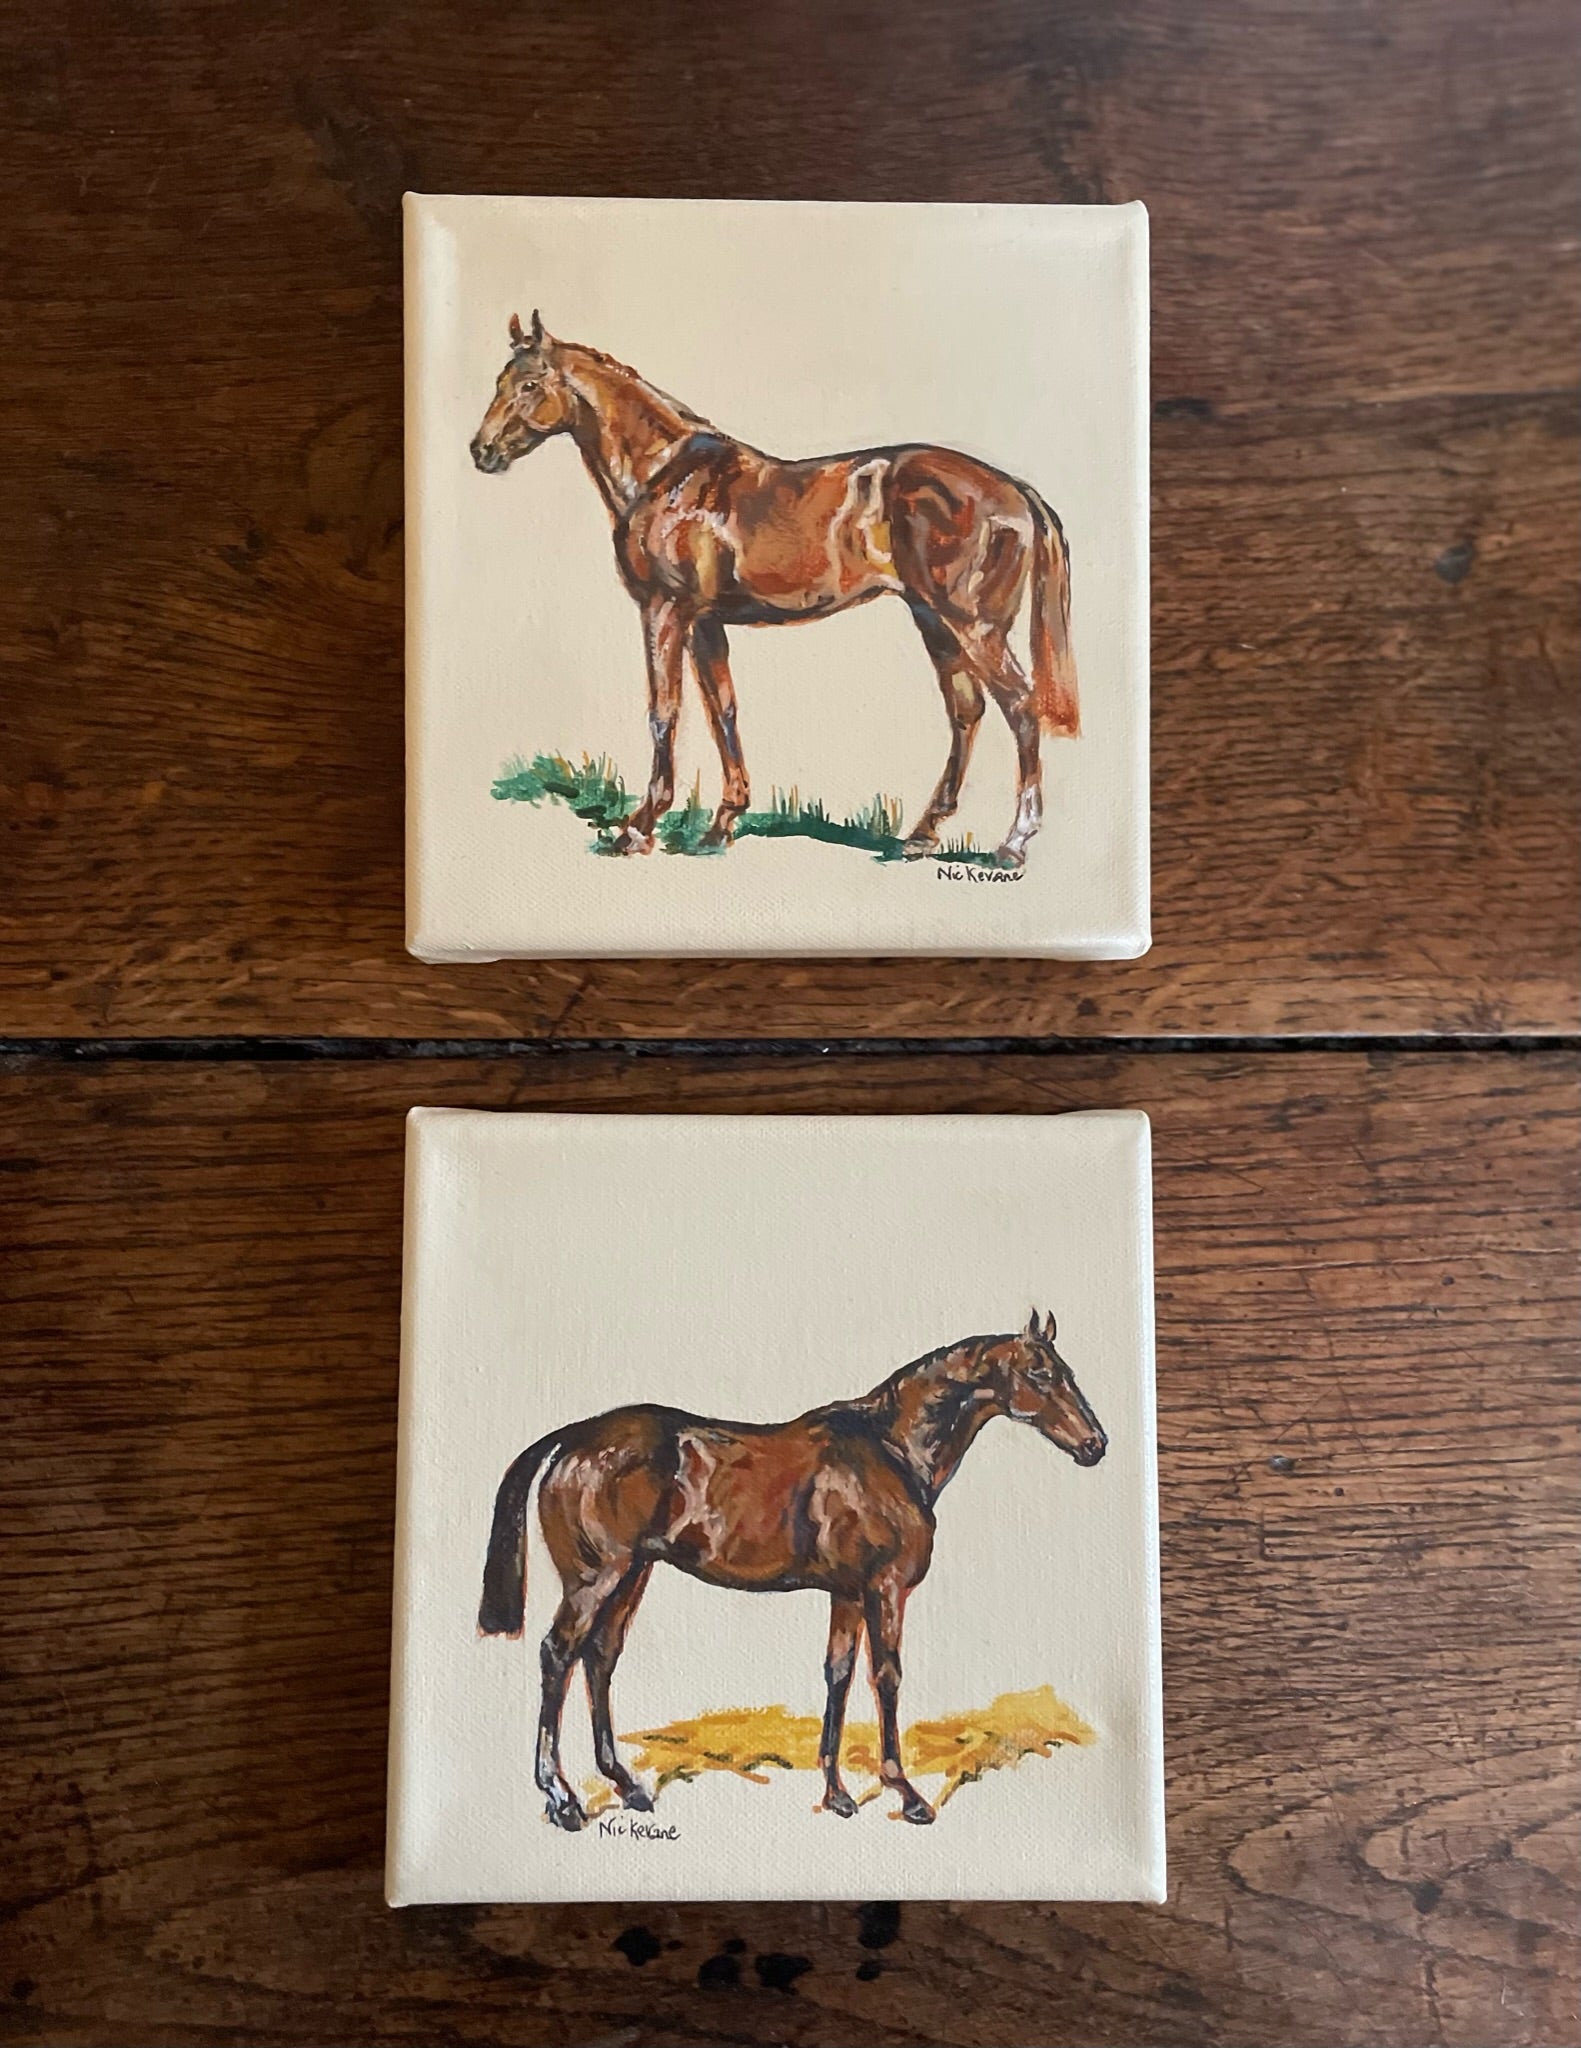 Bay Horse - 15cm x 15cm mini paintings depicting various countryside subjects.